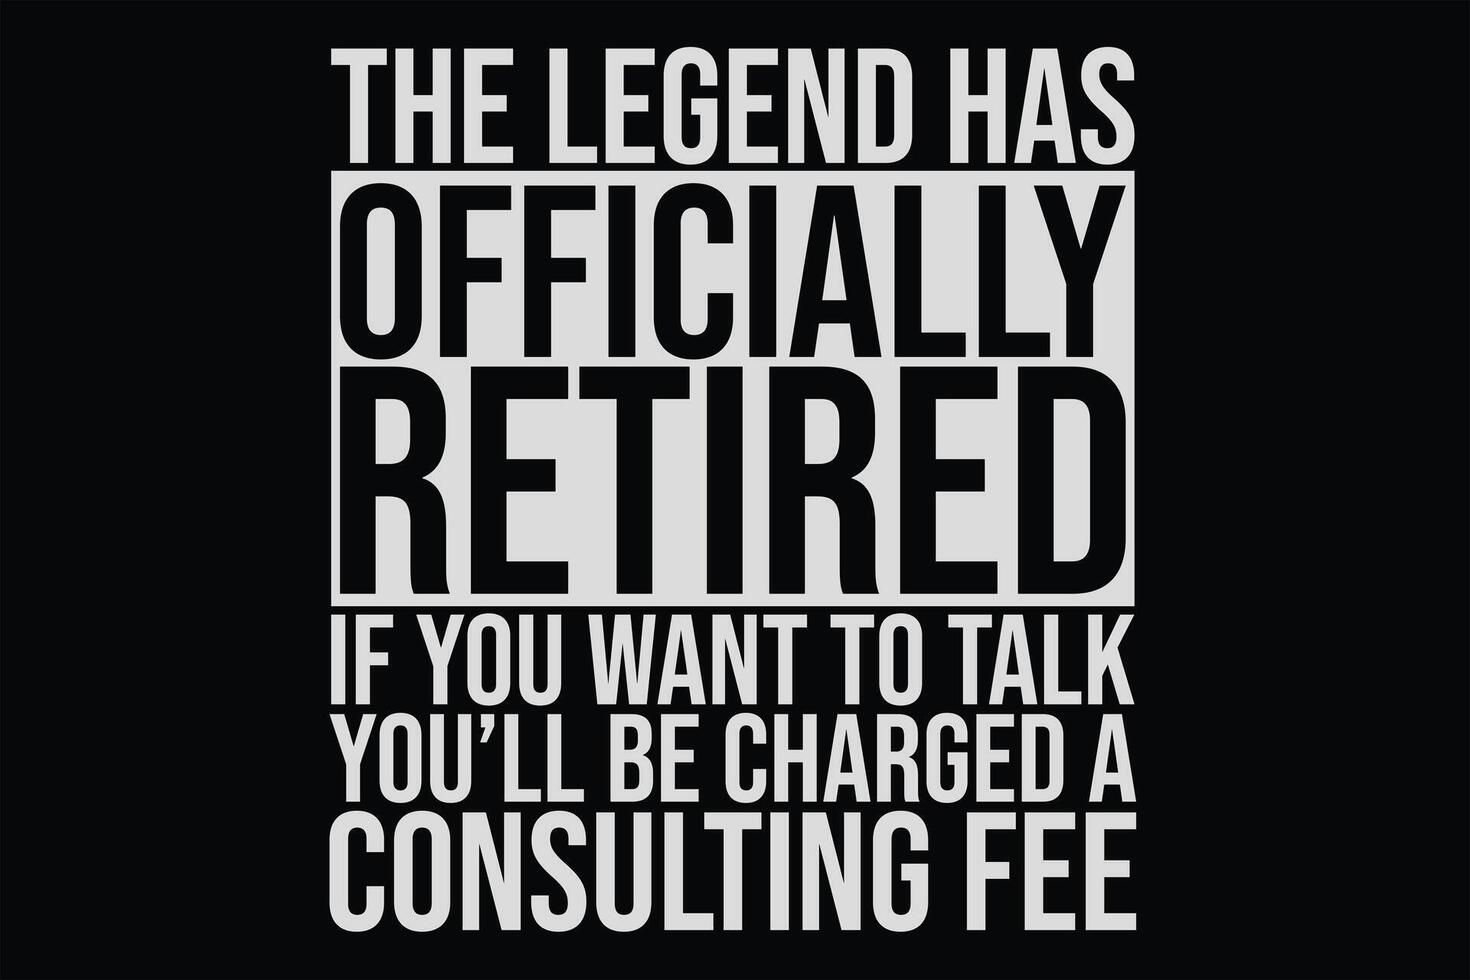 The Legend Has Officially Retired If You Want To talk You Will Be Charged A Consulting fee Funny T-Shirt Design vector